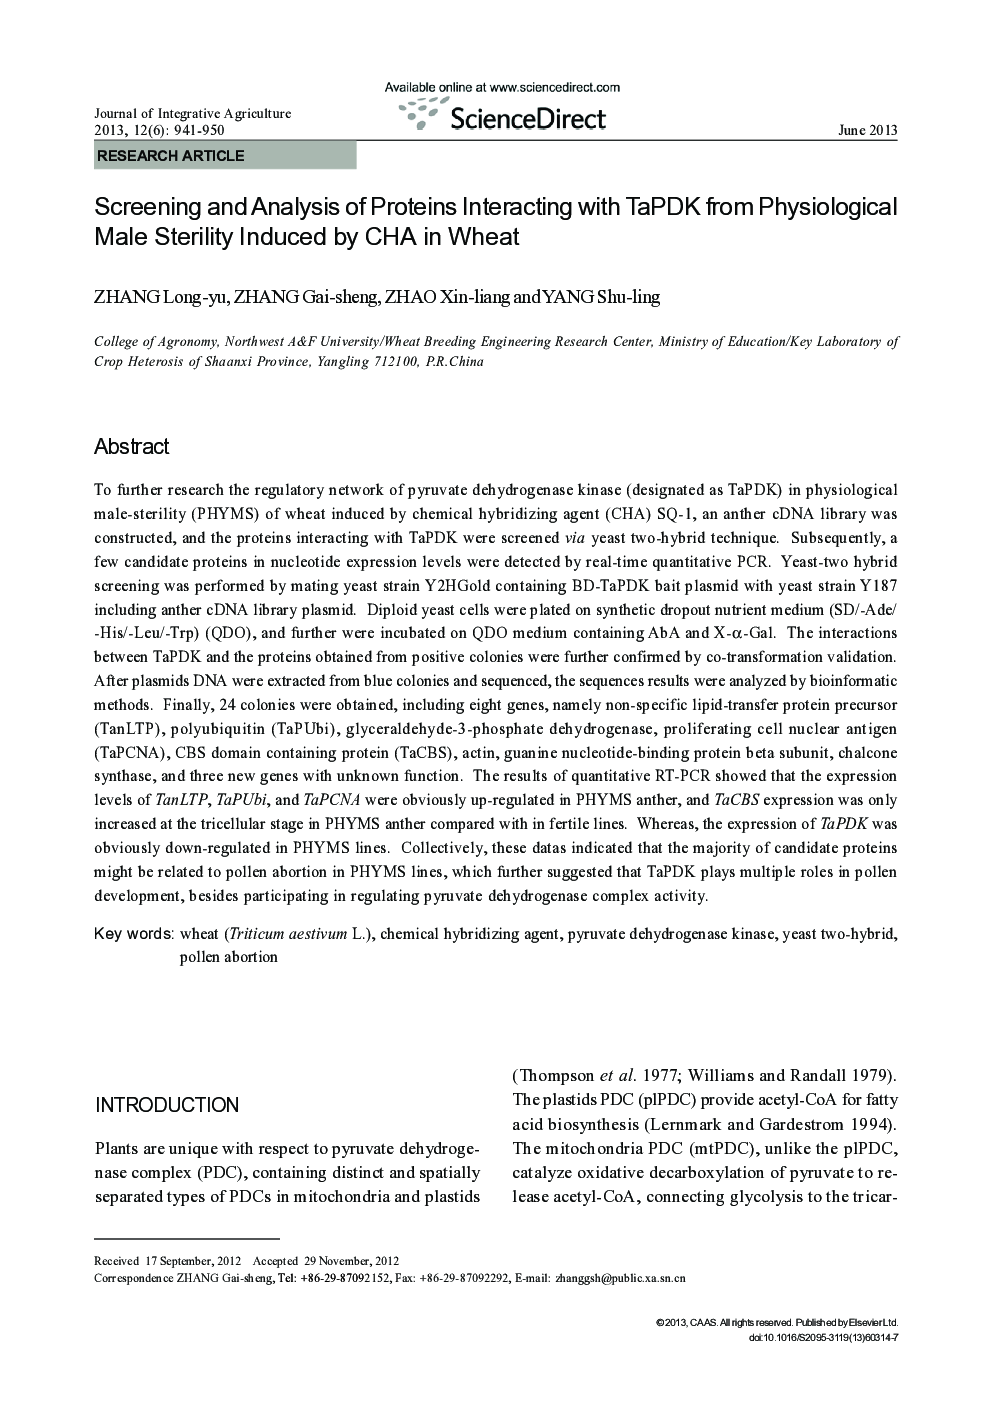 Screening and Analysis of Proteins Interacting with TaPDK from Physiological Male Sterility Induced by CHA in Wheat